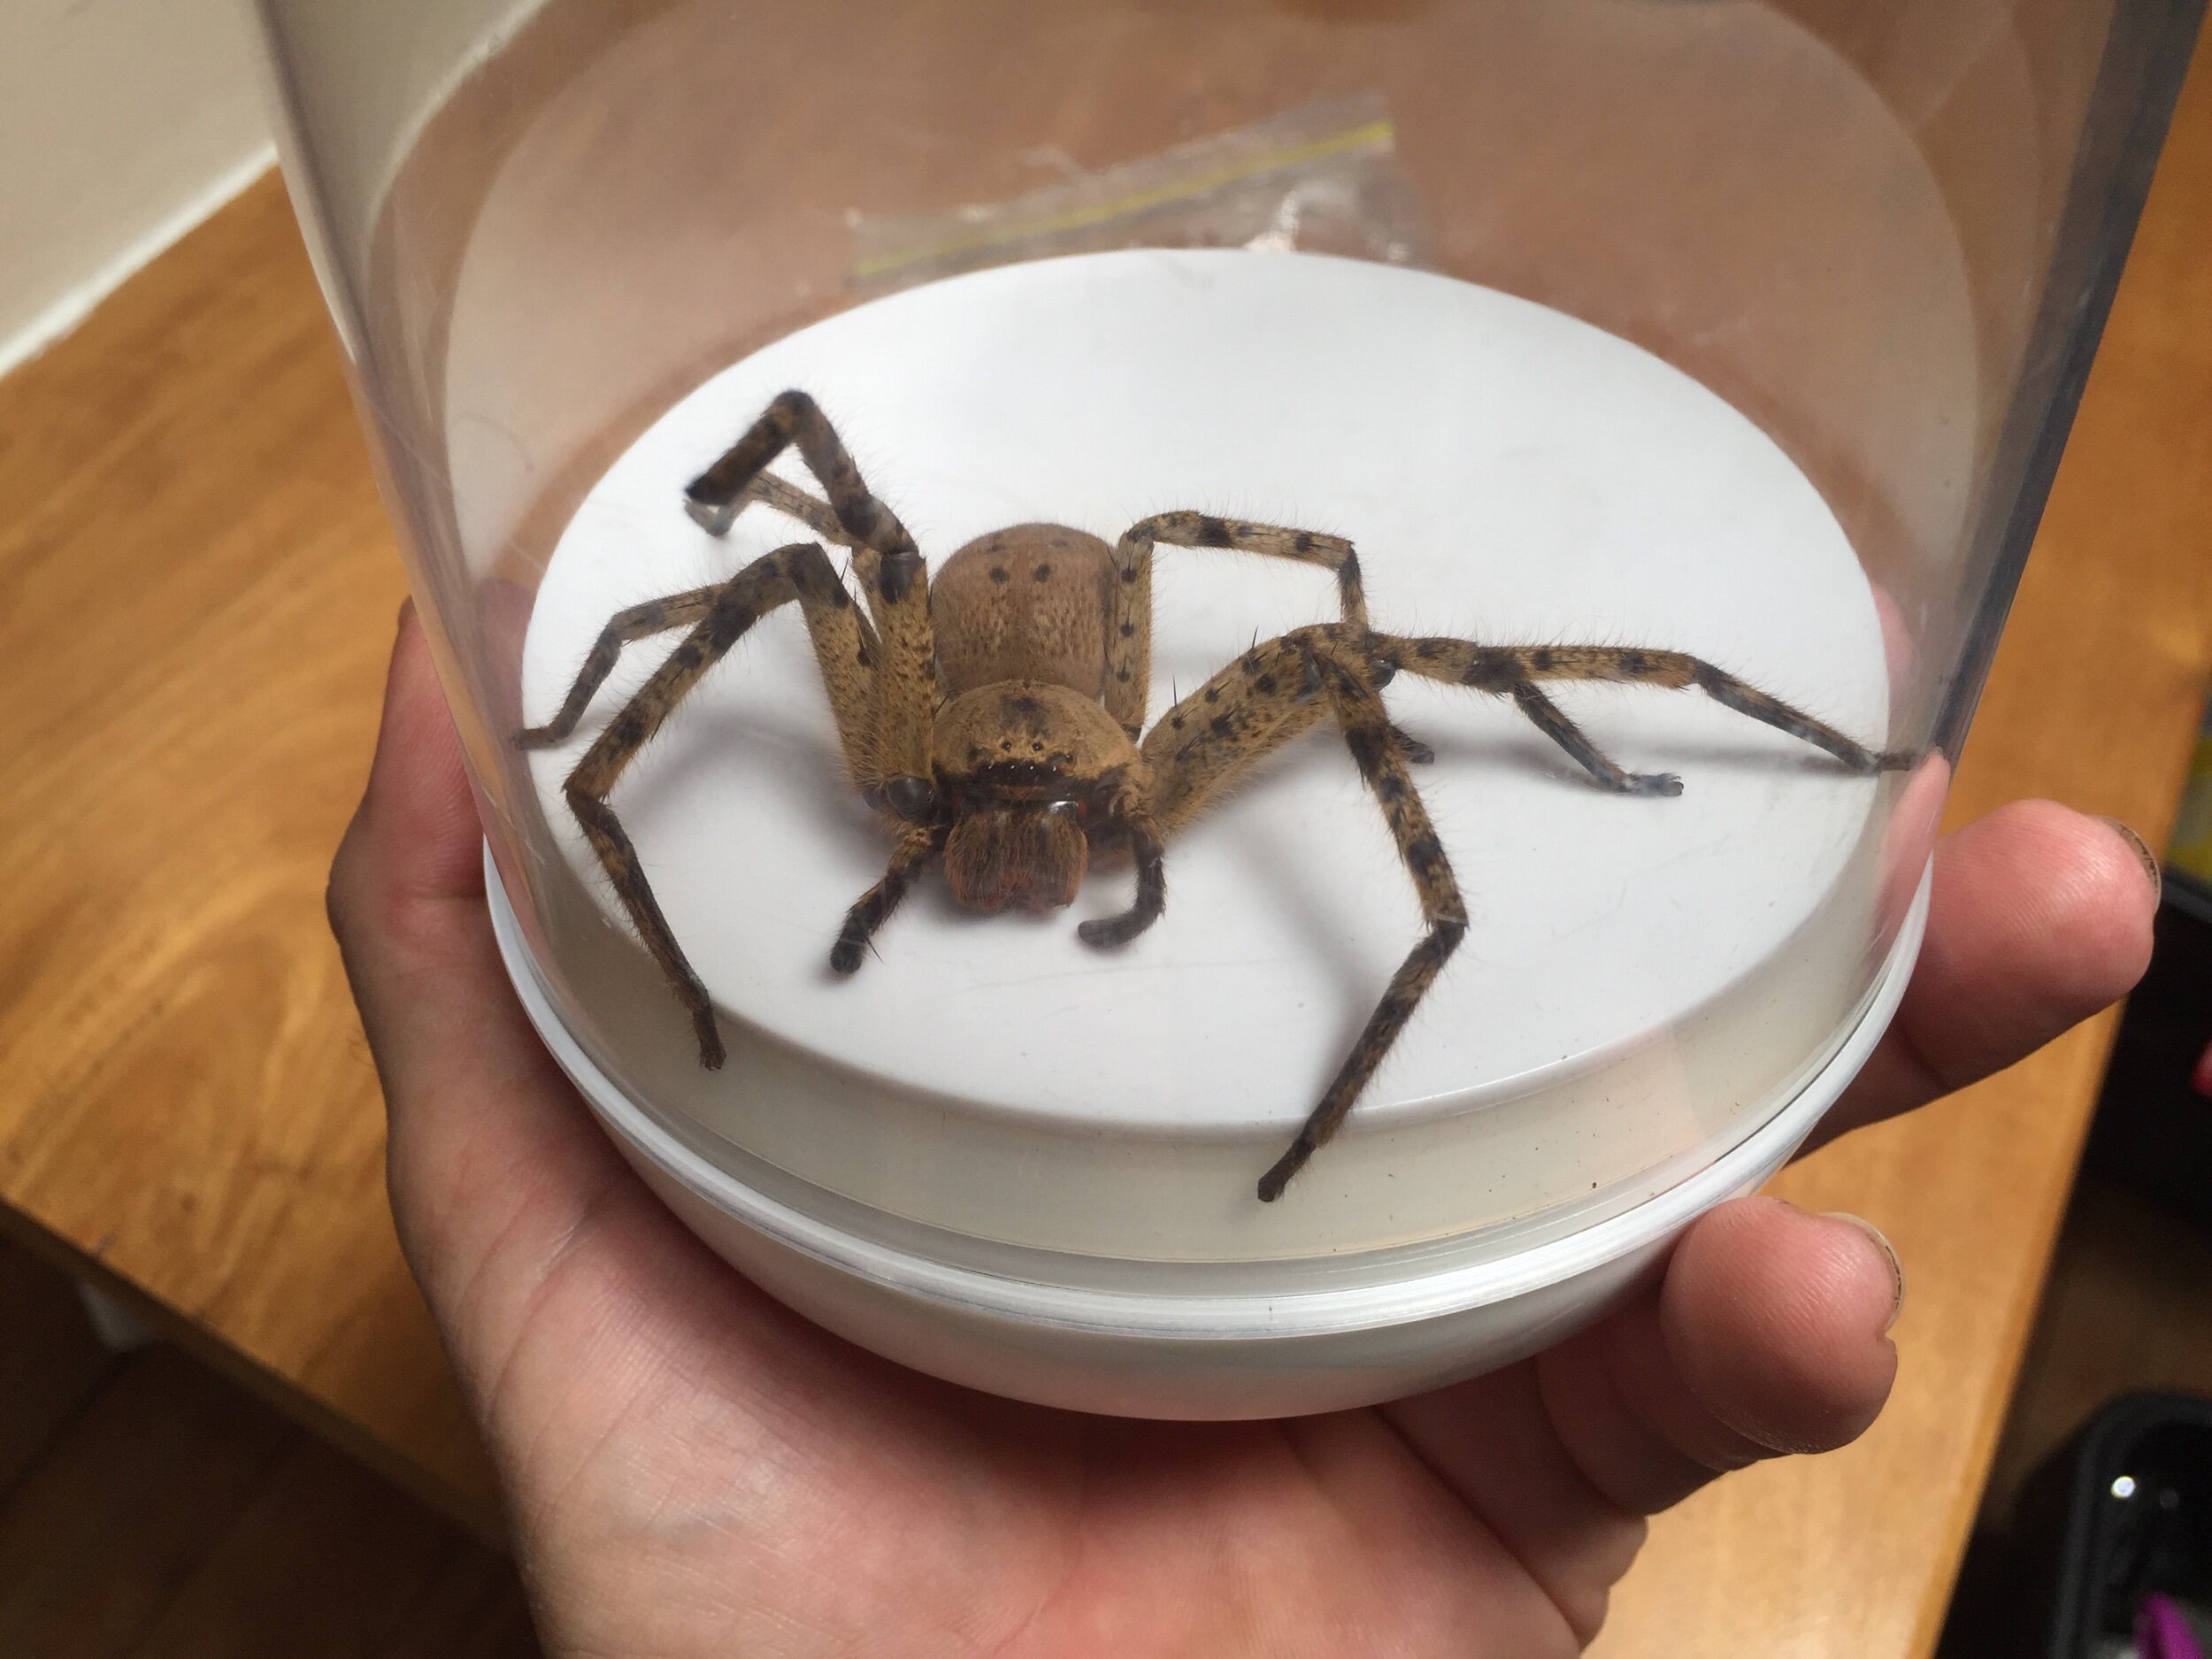  Yeah, unfortunately this tarantula was found inside the house :-O 